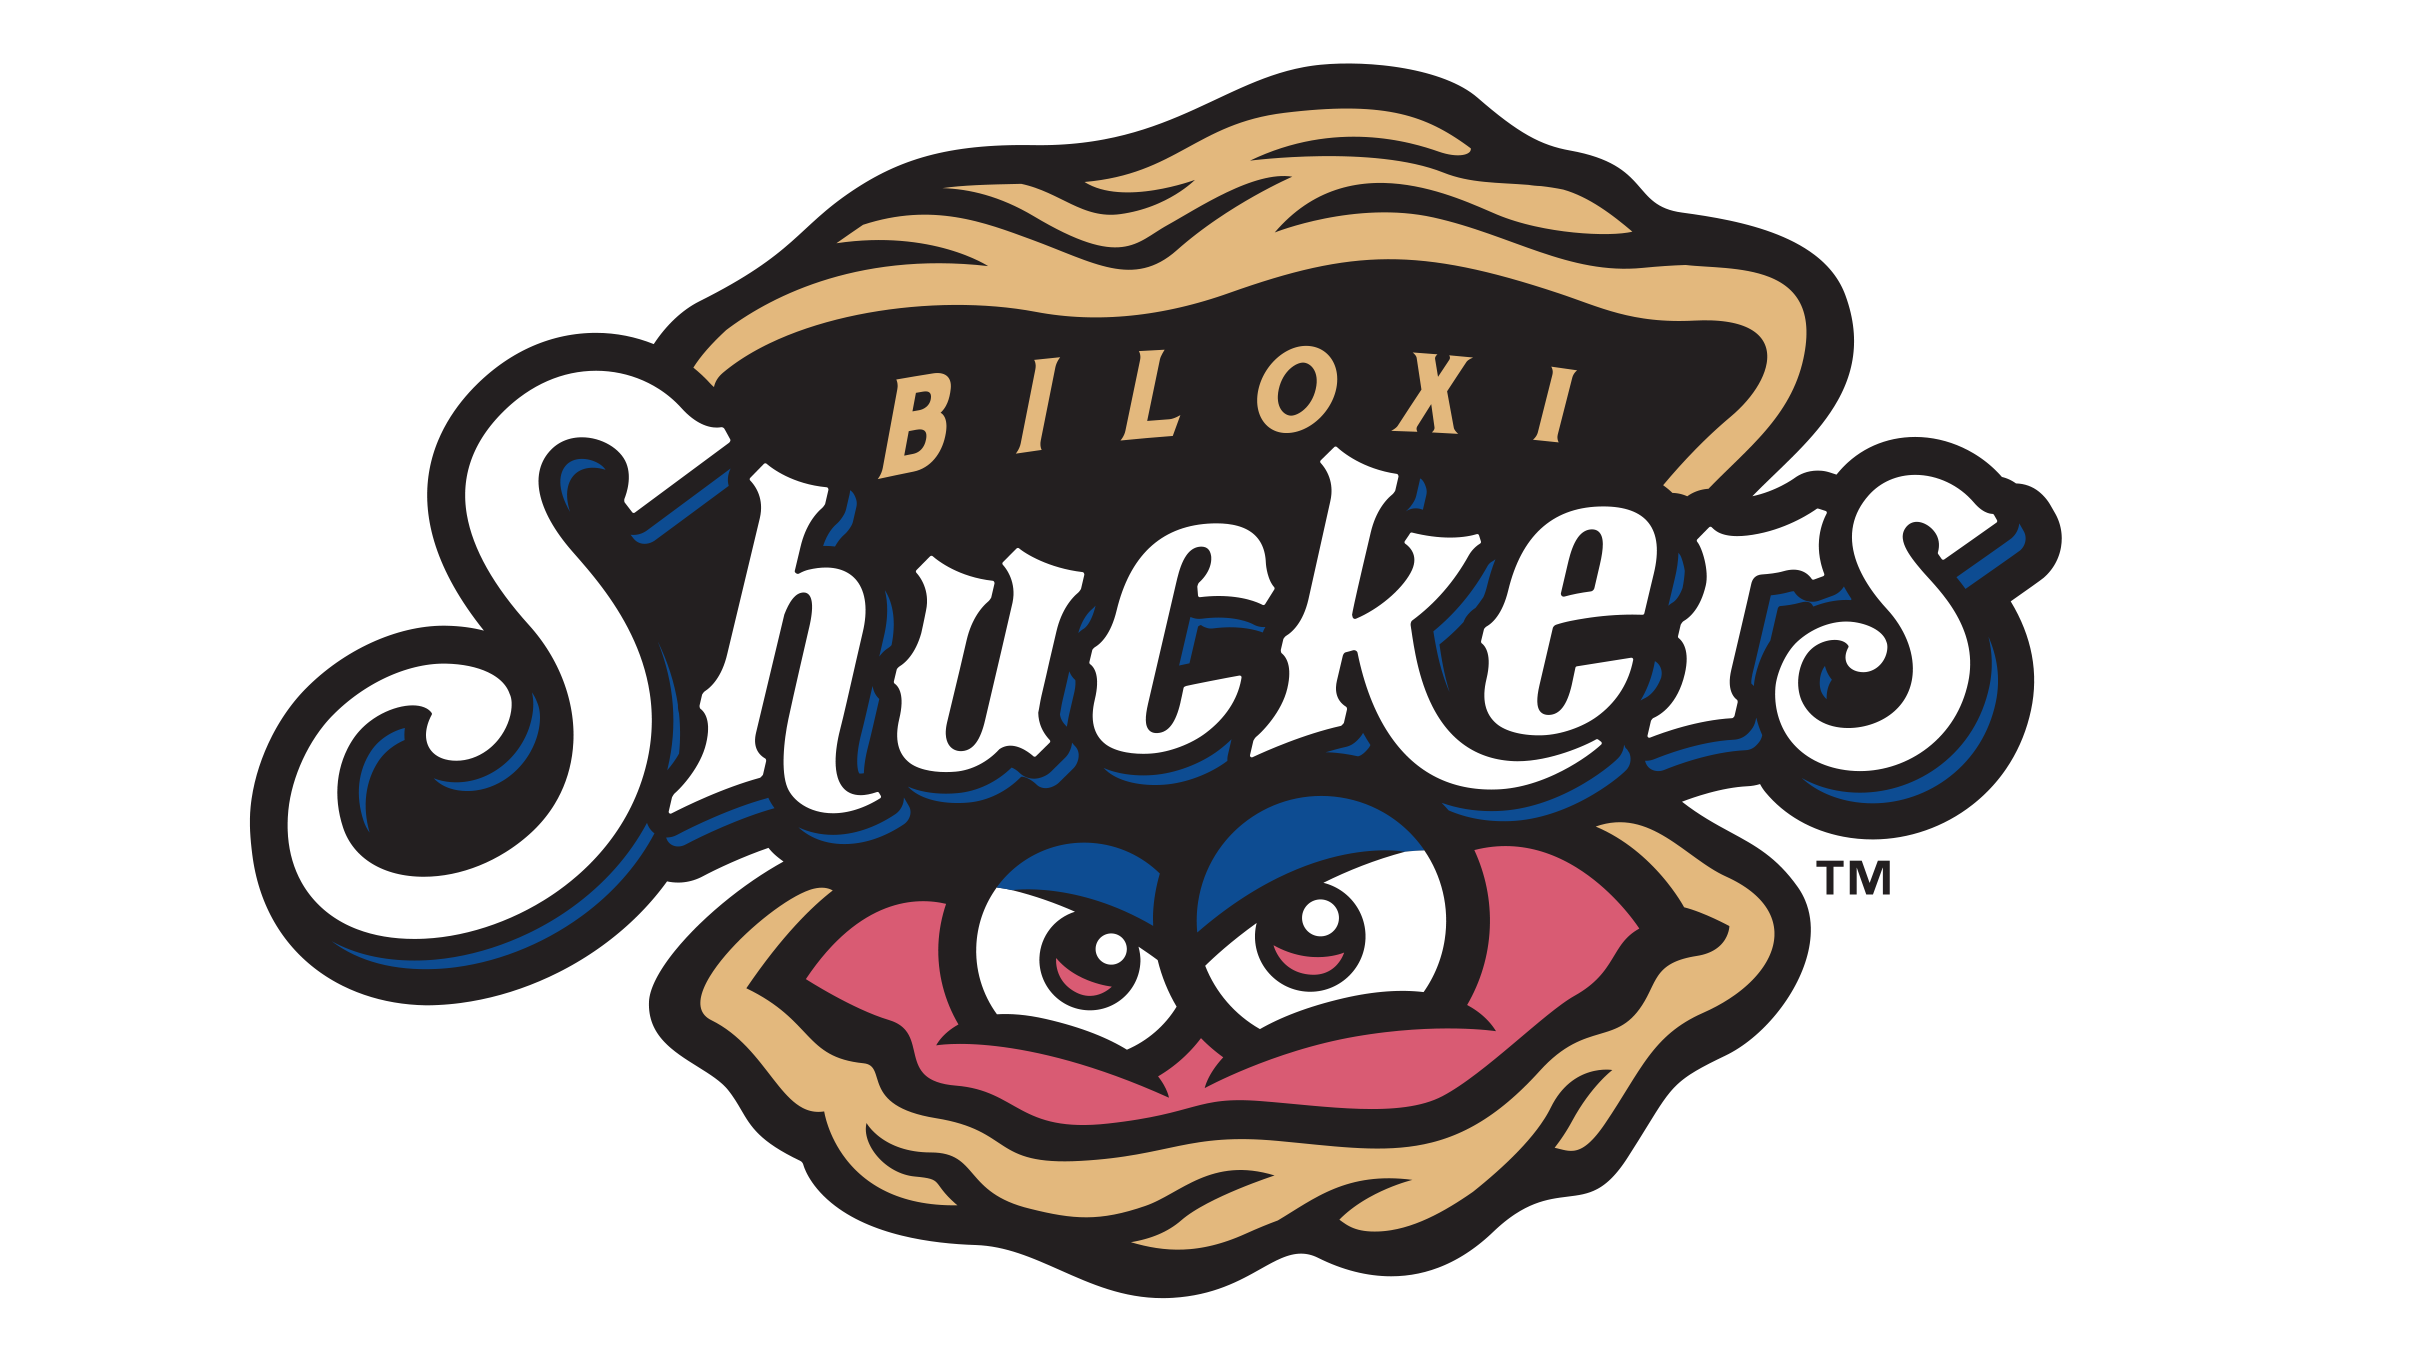 Biloxi Shuckers vs. Montgomery Biscuits in Biloxi promo photo for Sunday Funday presale offer code